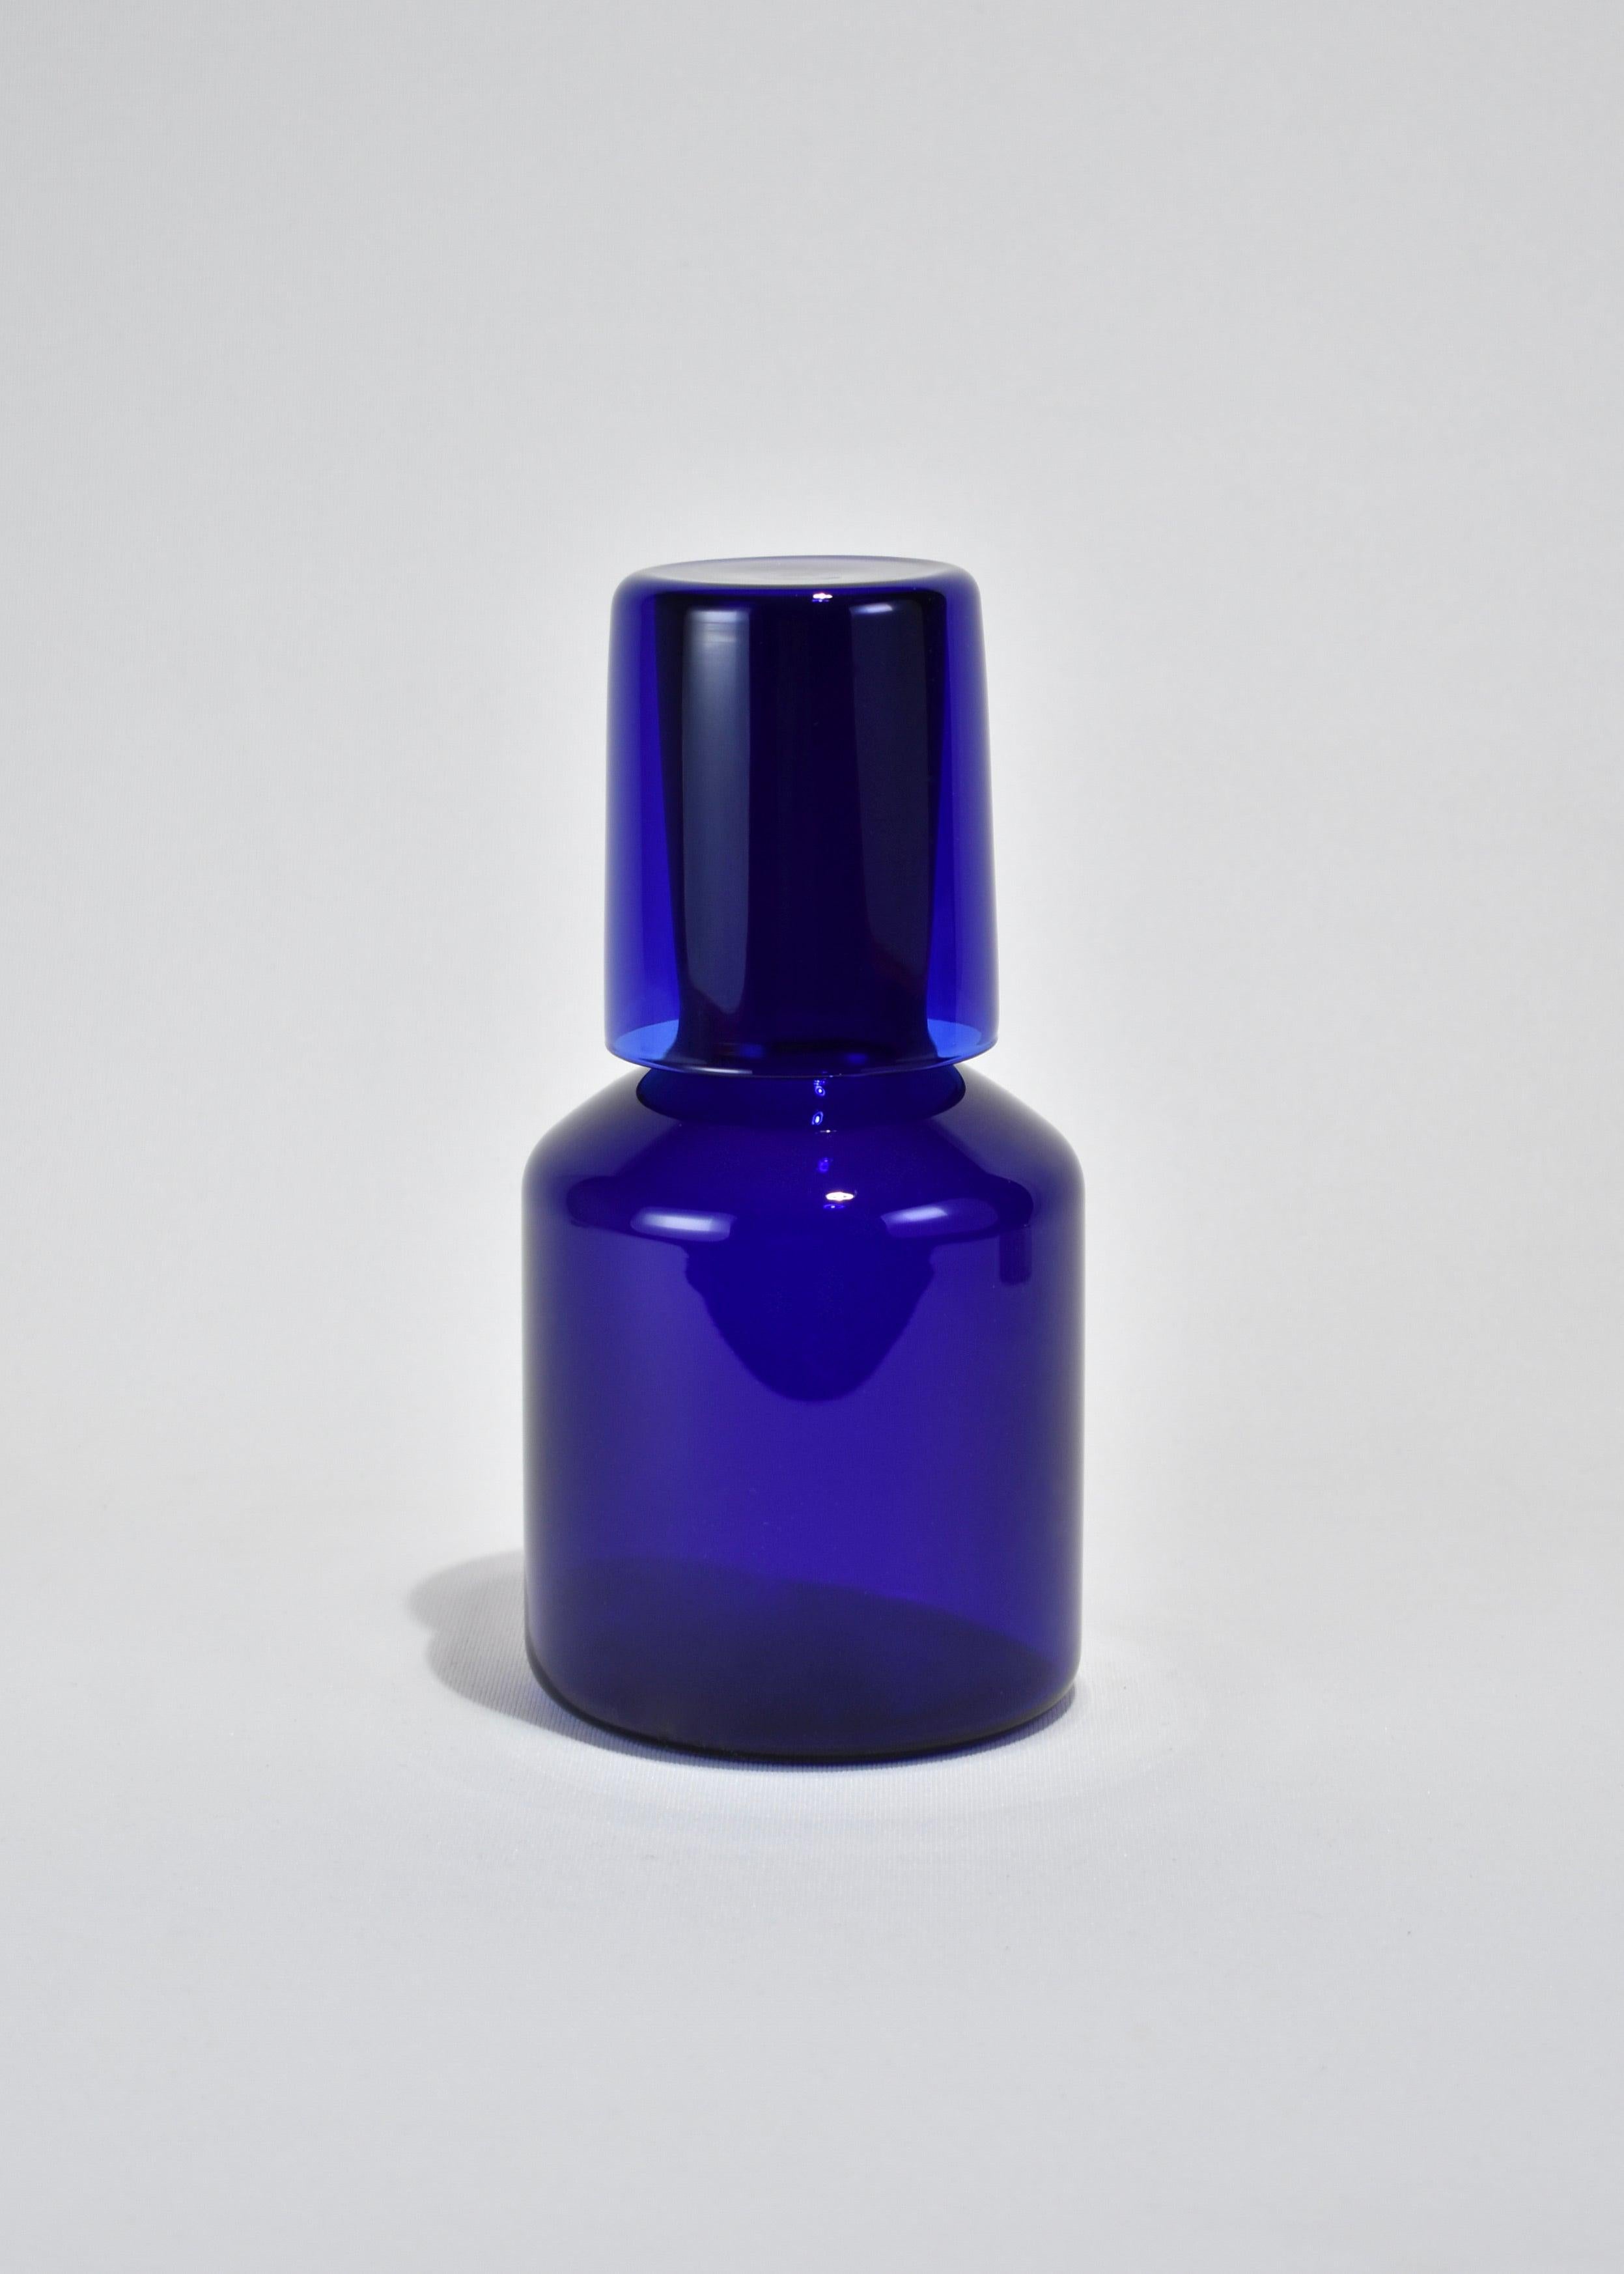 Indigo carafe set by Maison Balzac inspired by the traditional sets used in France and displayed on a bedside table at night. 

Food grade colored glass, individually mouth blown. 
Heat and cold resistant.
Hand wash recommended.